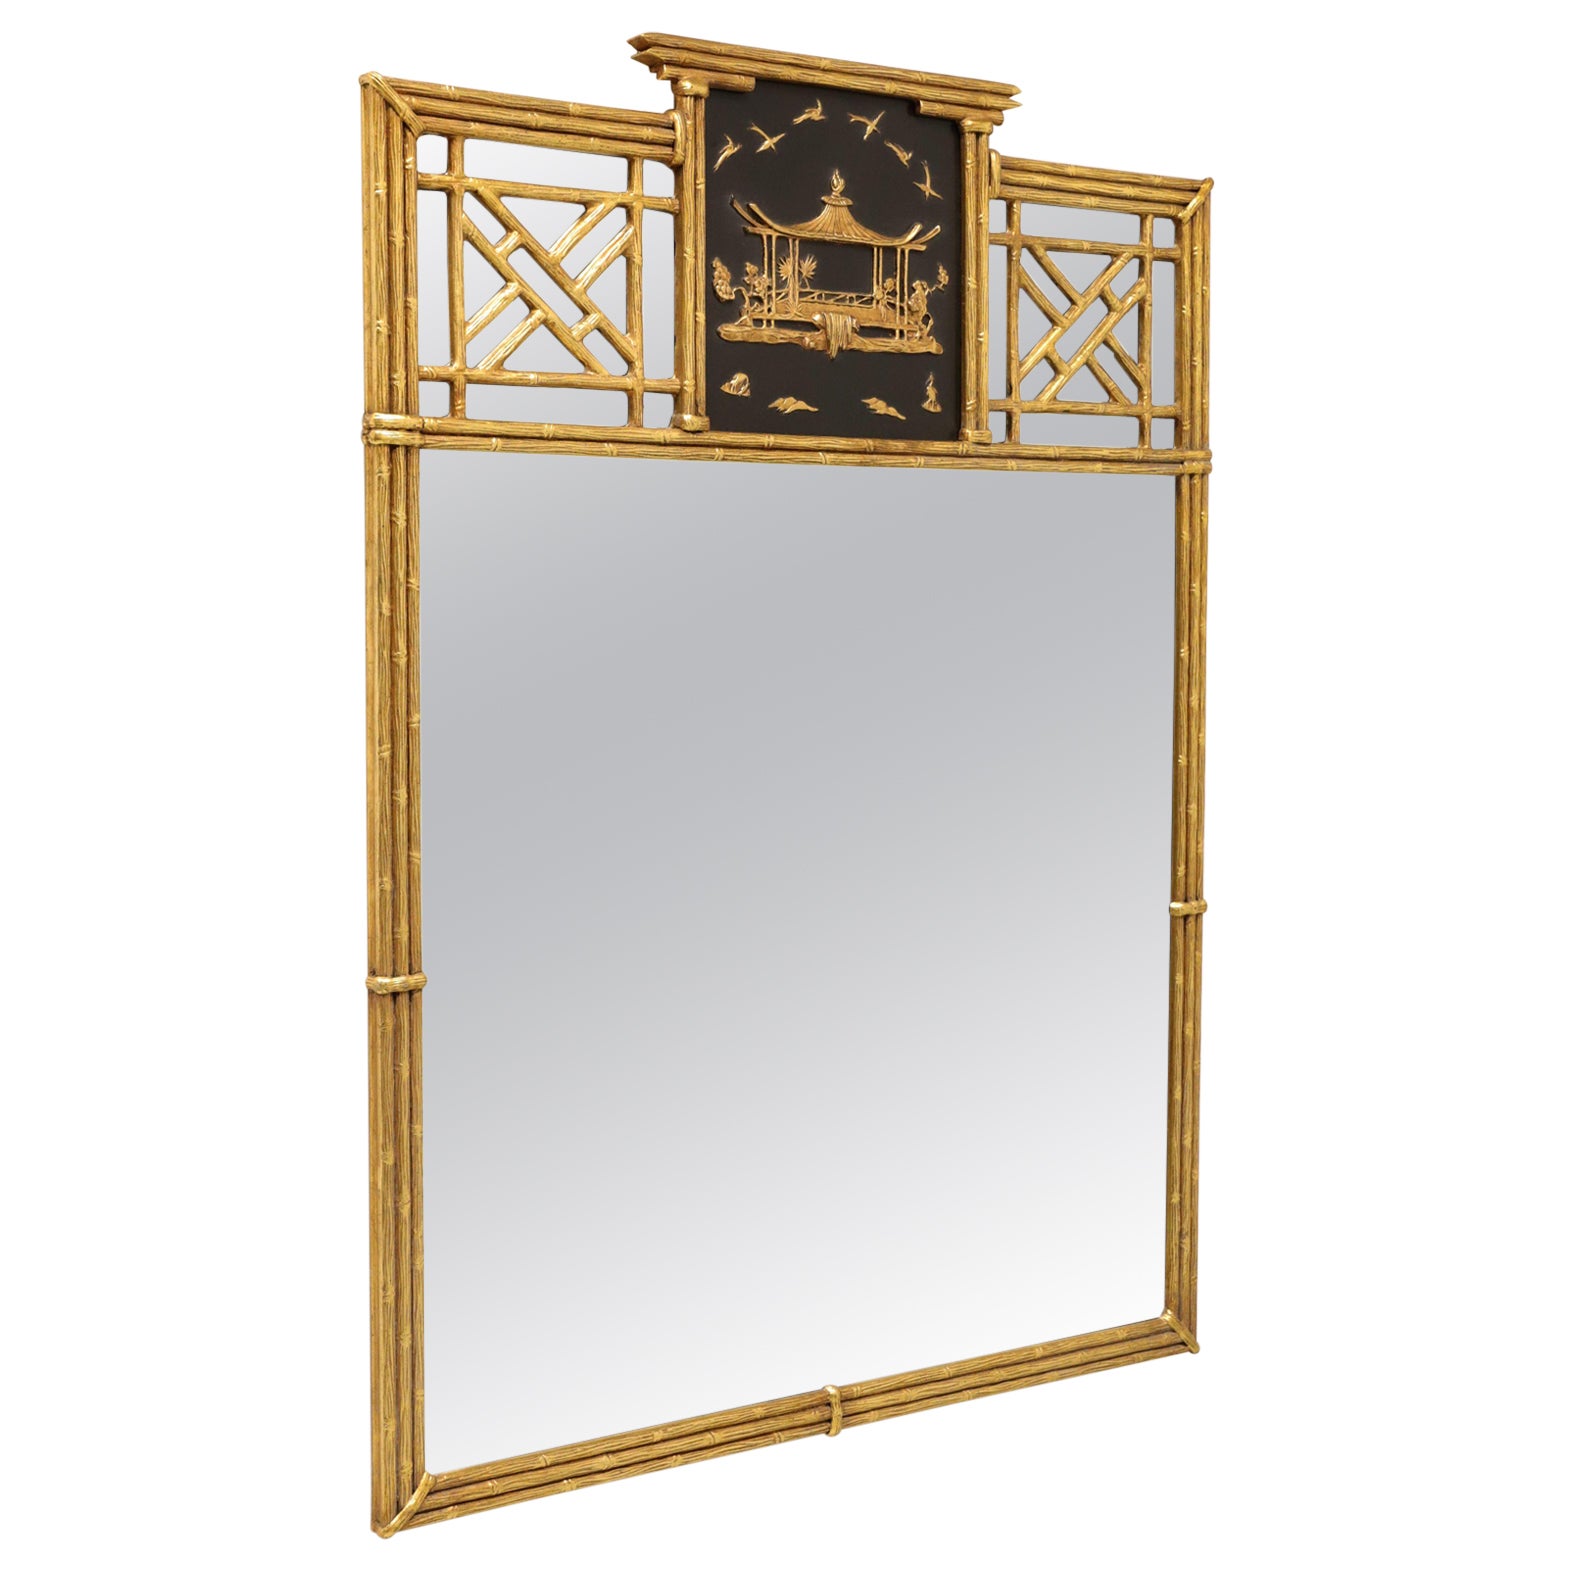 FRIEDMAN BROTHERS Gold Gilt Faux Bamboo Japanese Pagoda Mirror For Sale